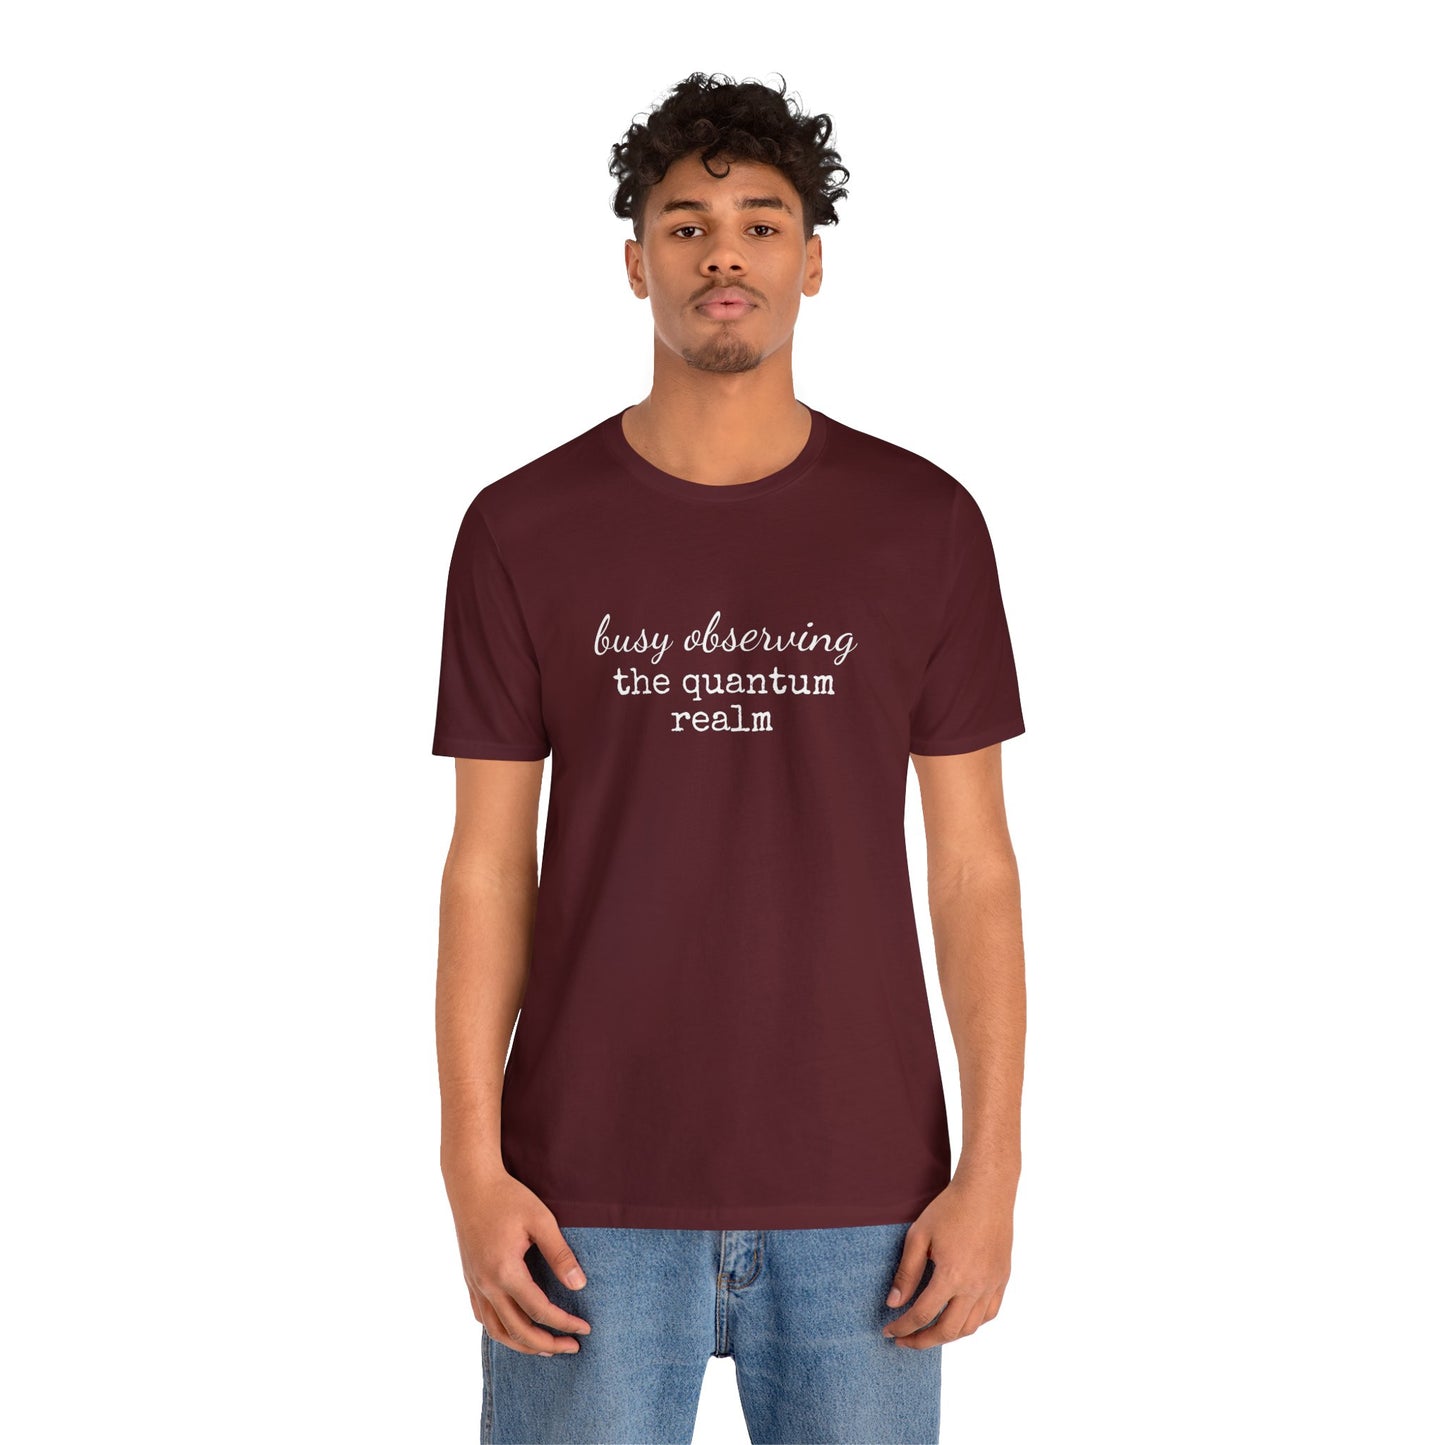 "Busy Observing the Quantum Realm" Unisex Tshirt